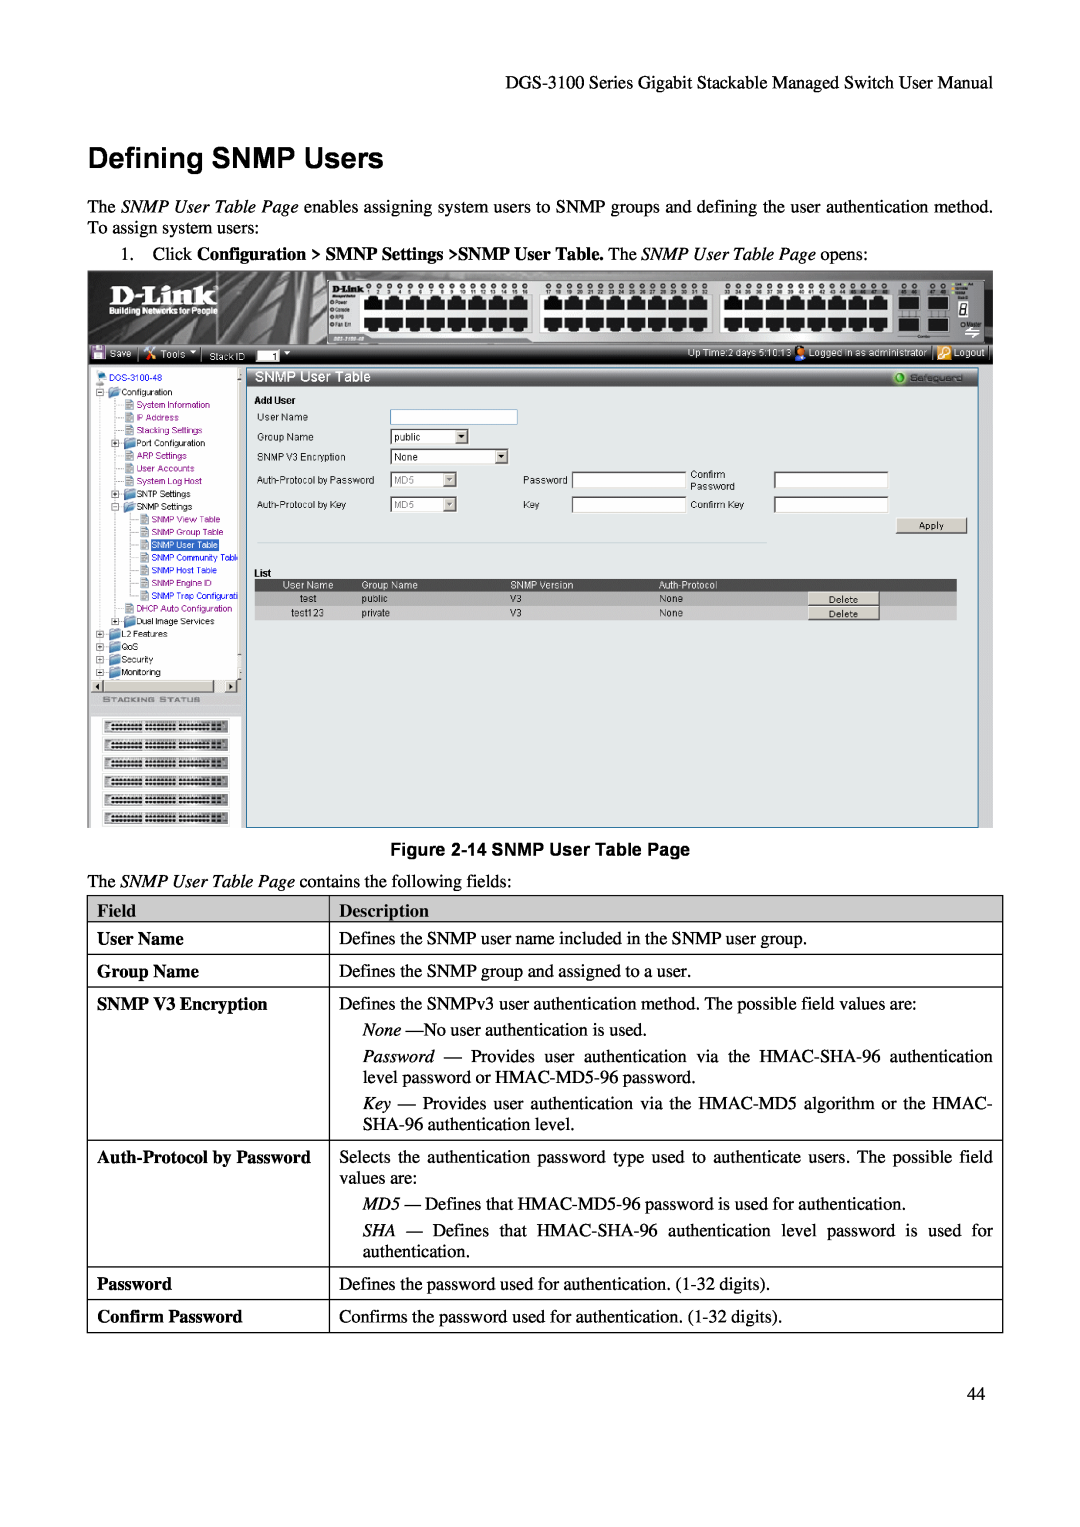 D-Link DGS-3100 Defining SNMP Users, 14 SNMP User Table Page, Field User Name Group Name SNMP V3 Encryption, Description 